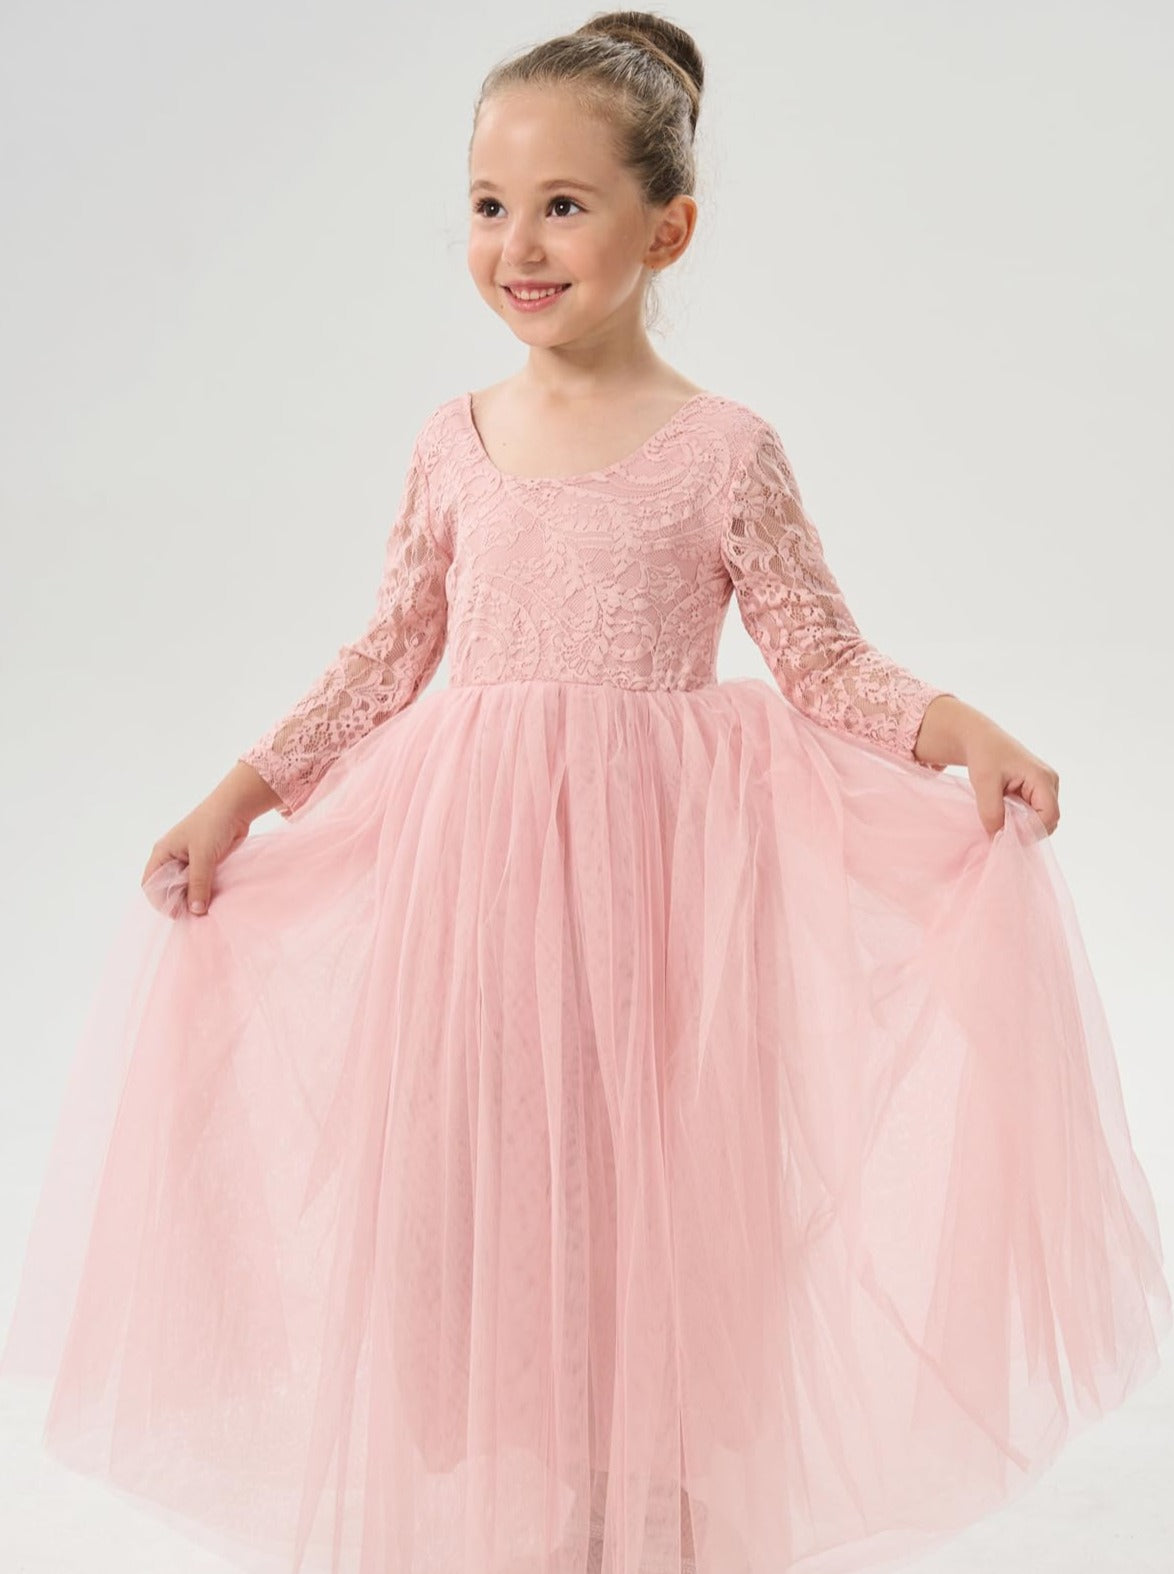 Paisley Lace Flower Girl Dress in Dusty Pink